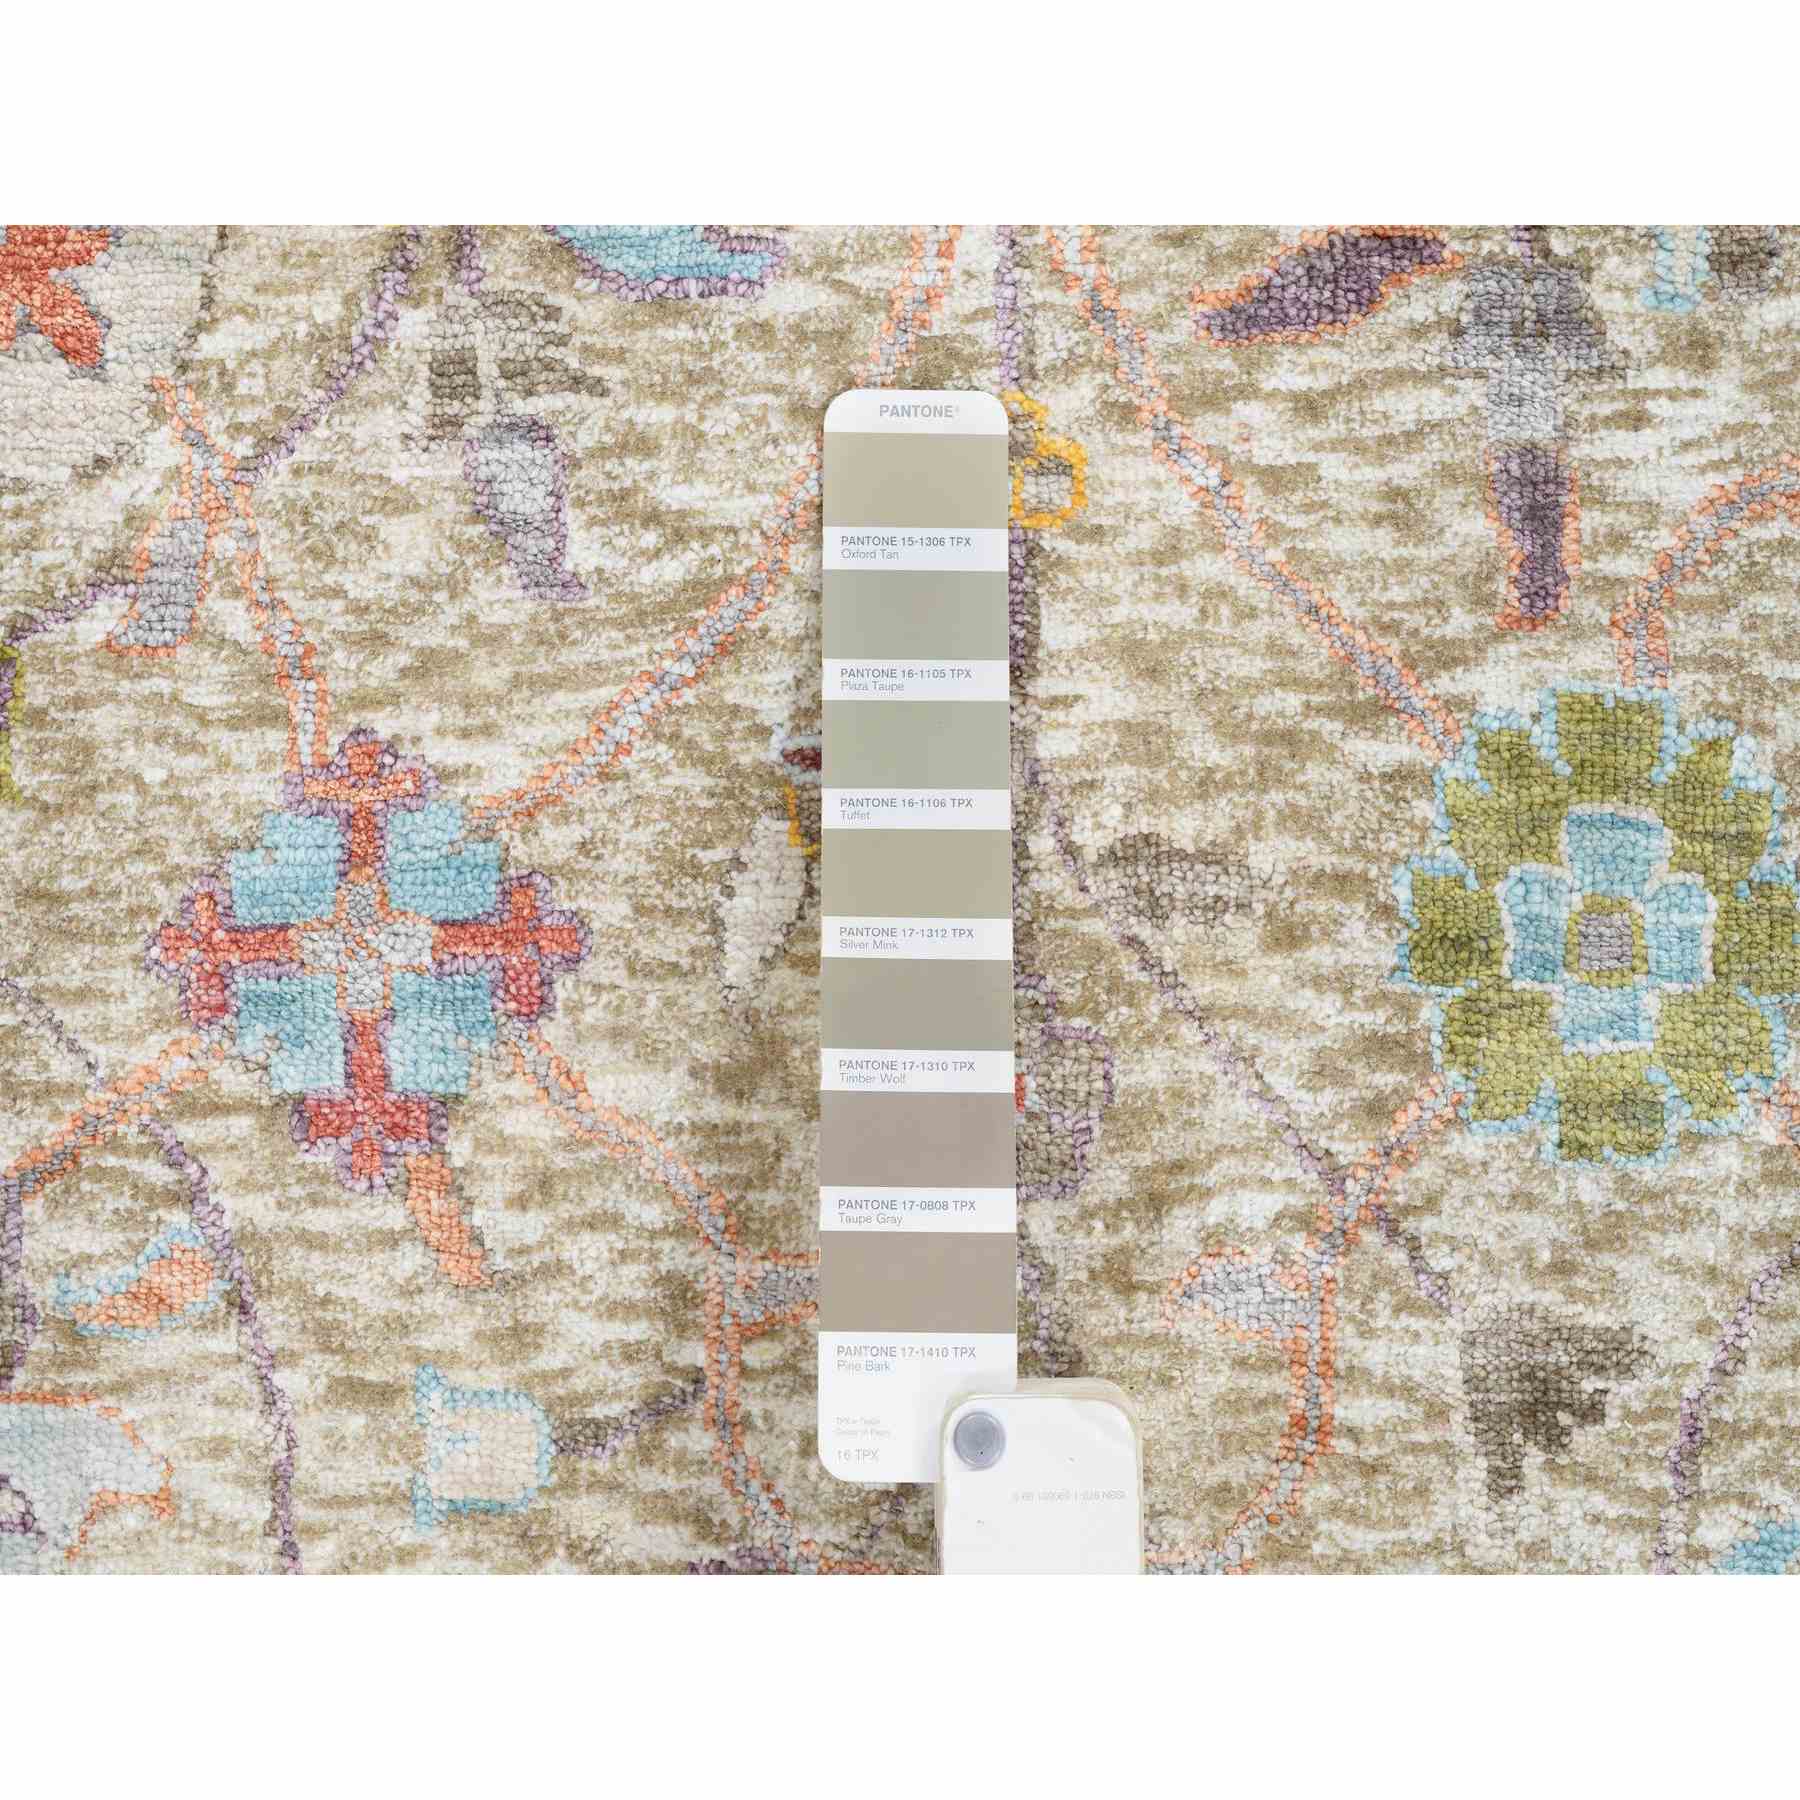 Transitional-Hand-Knotted-Rug-323295